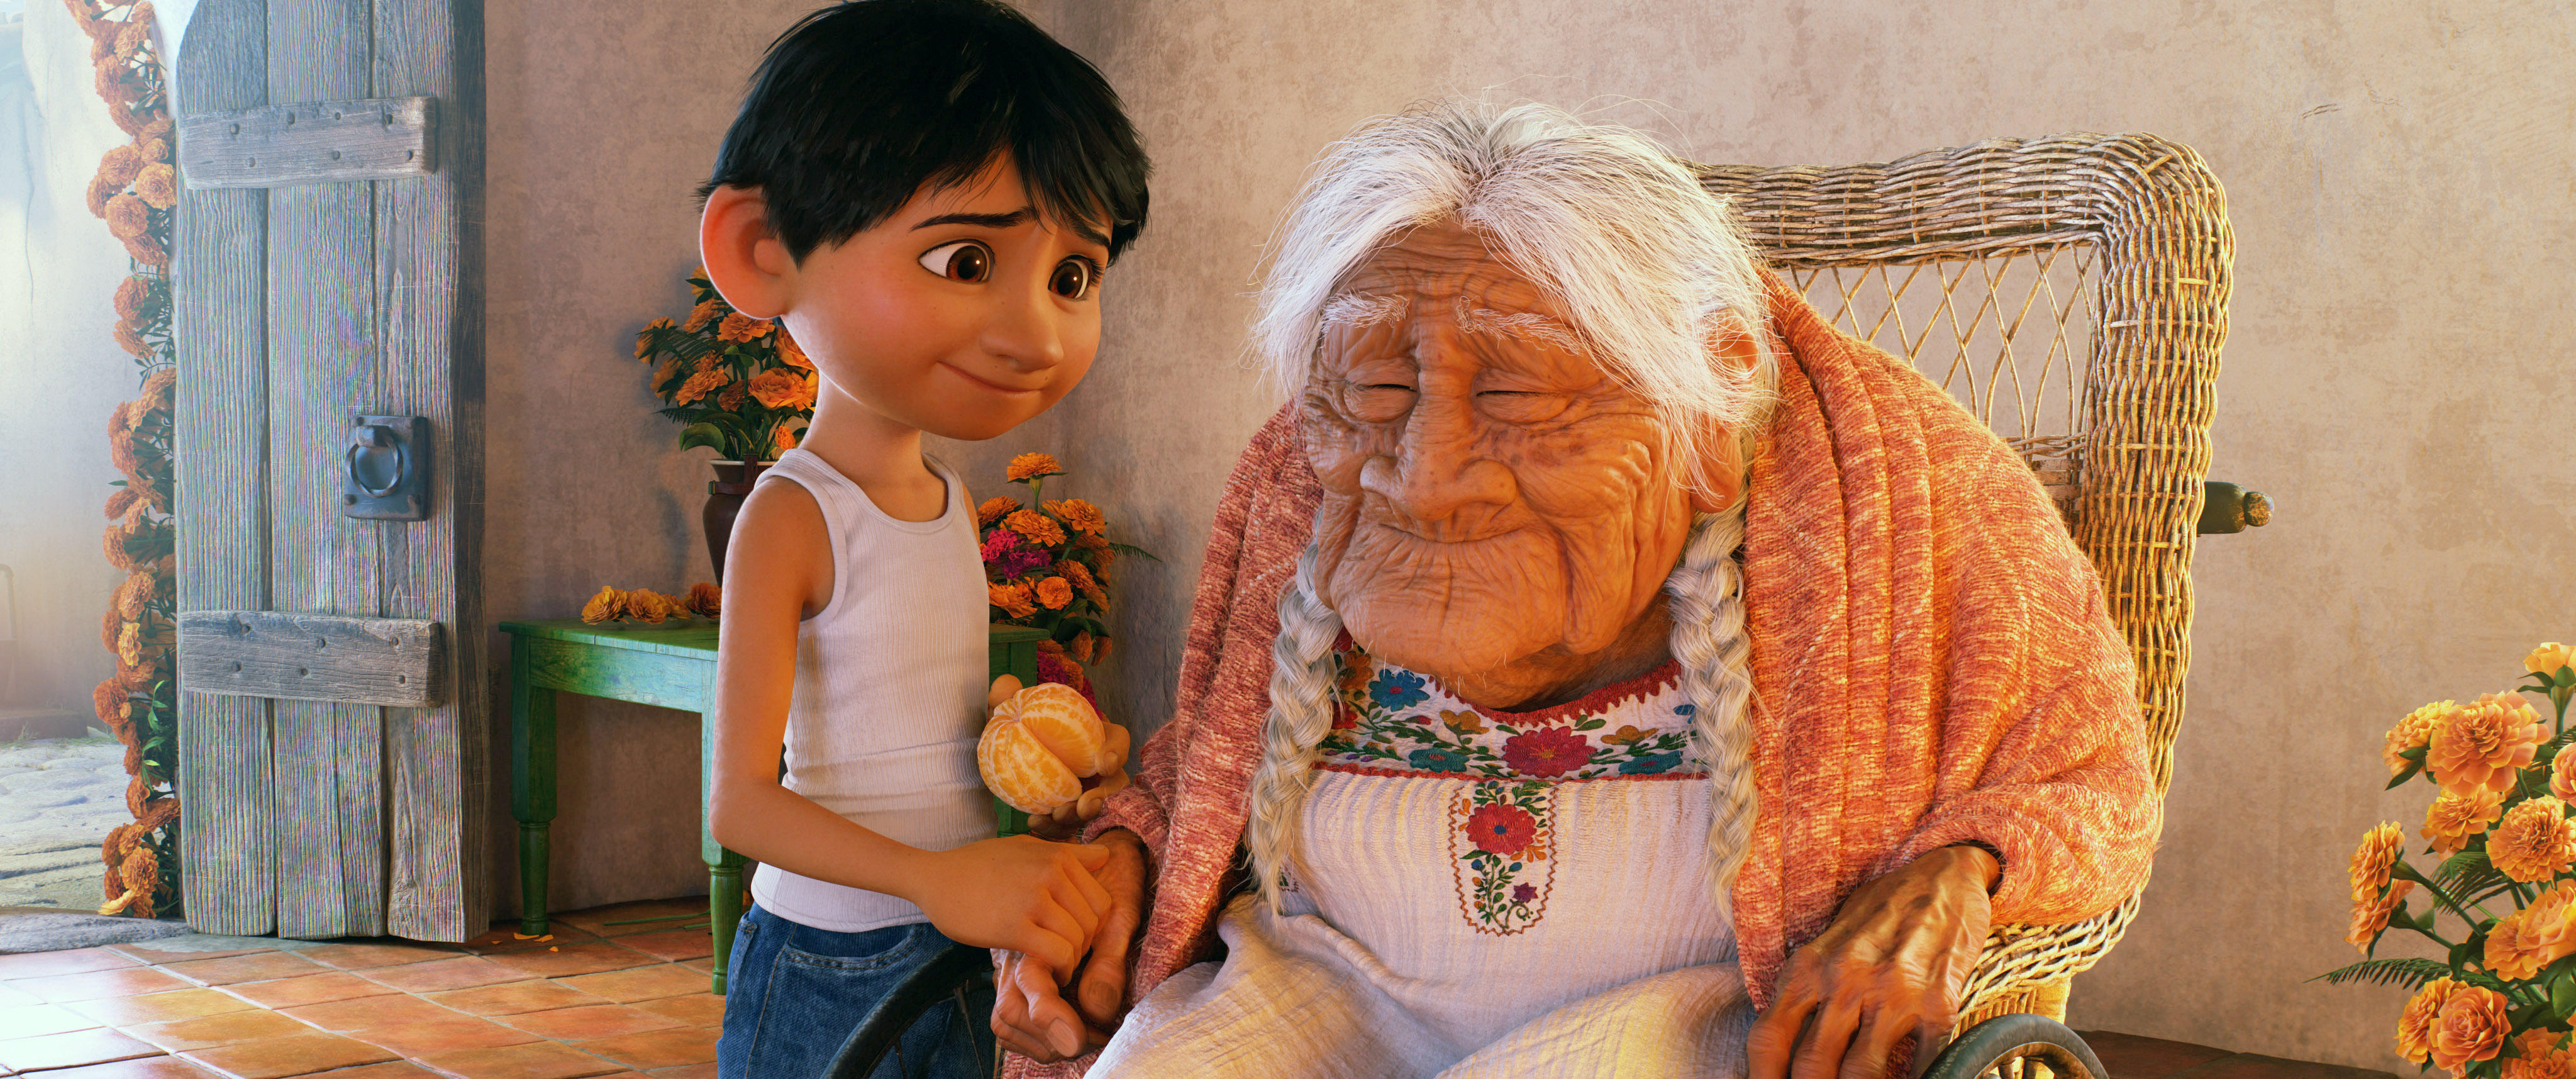 Mama Coco (right), voiced by Ana in Disney film Coco